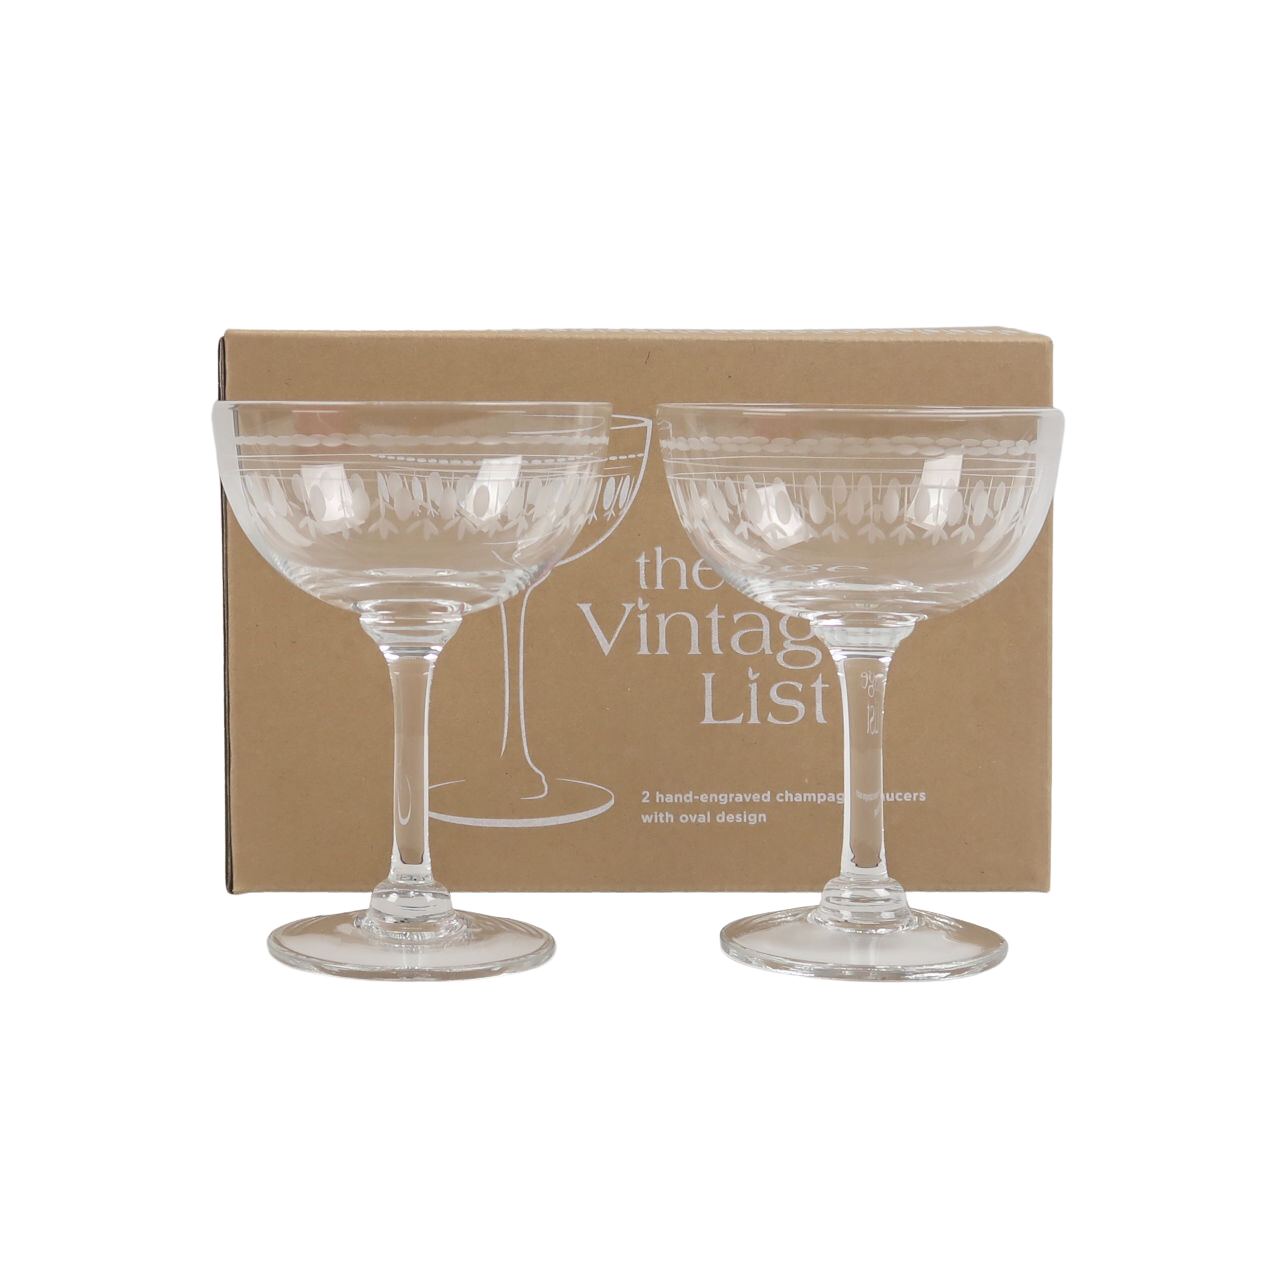 The Vintage List Box of 2 Etched 'Ovals' Design Champagne Coupes